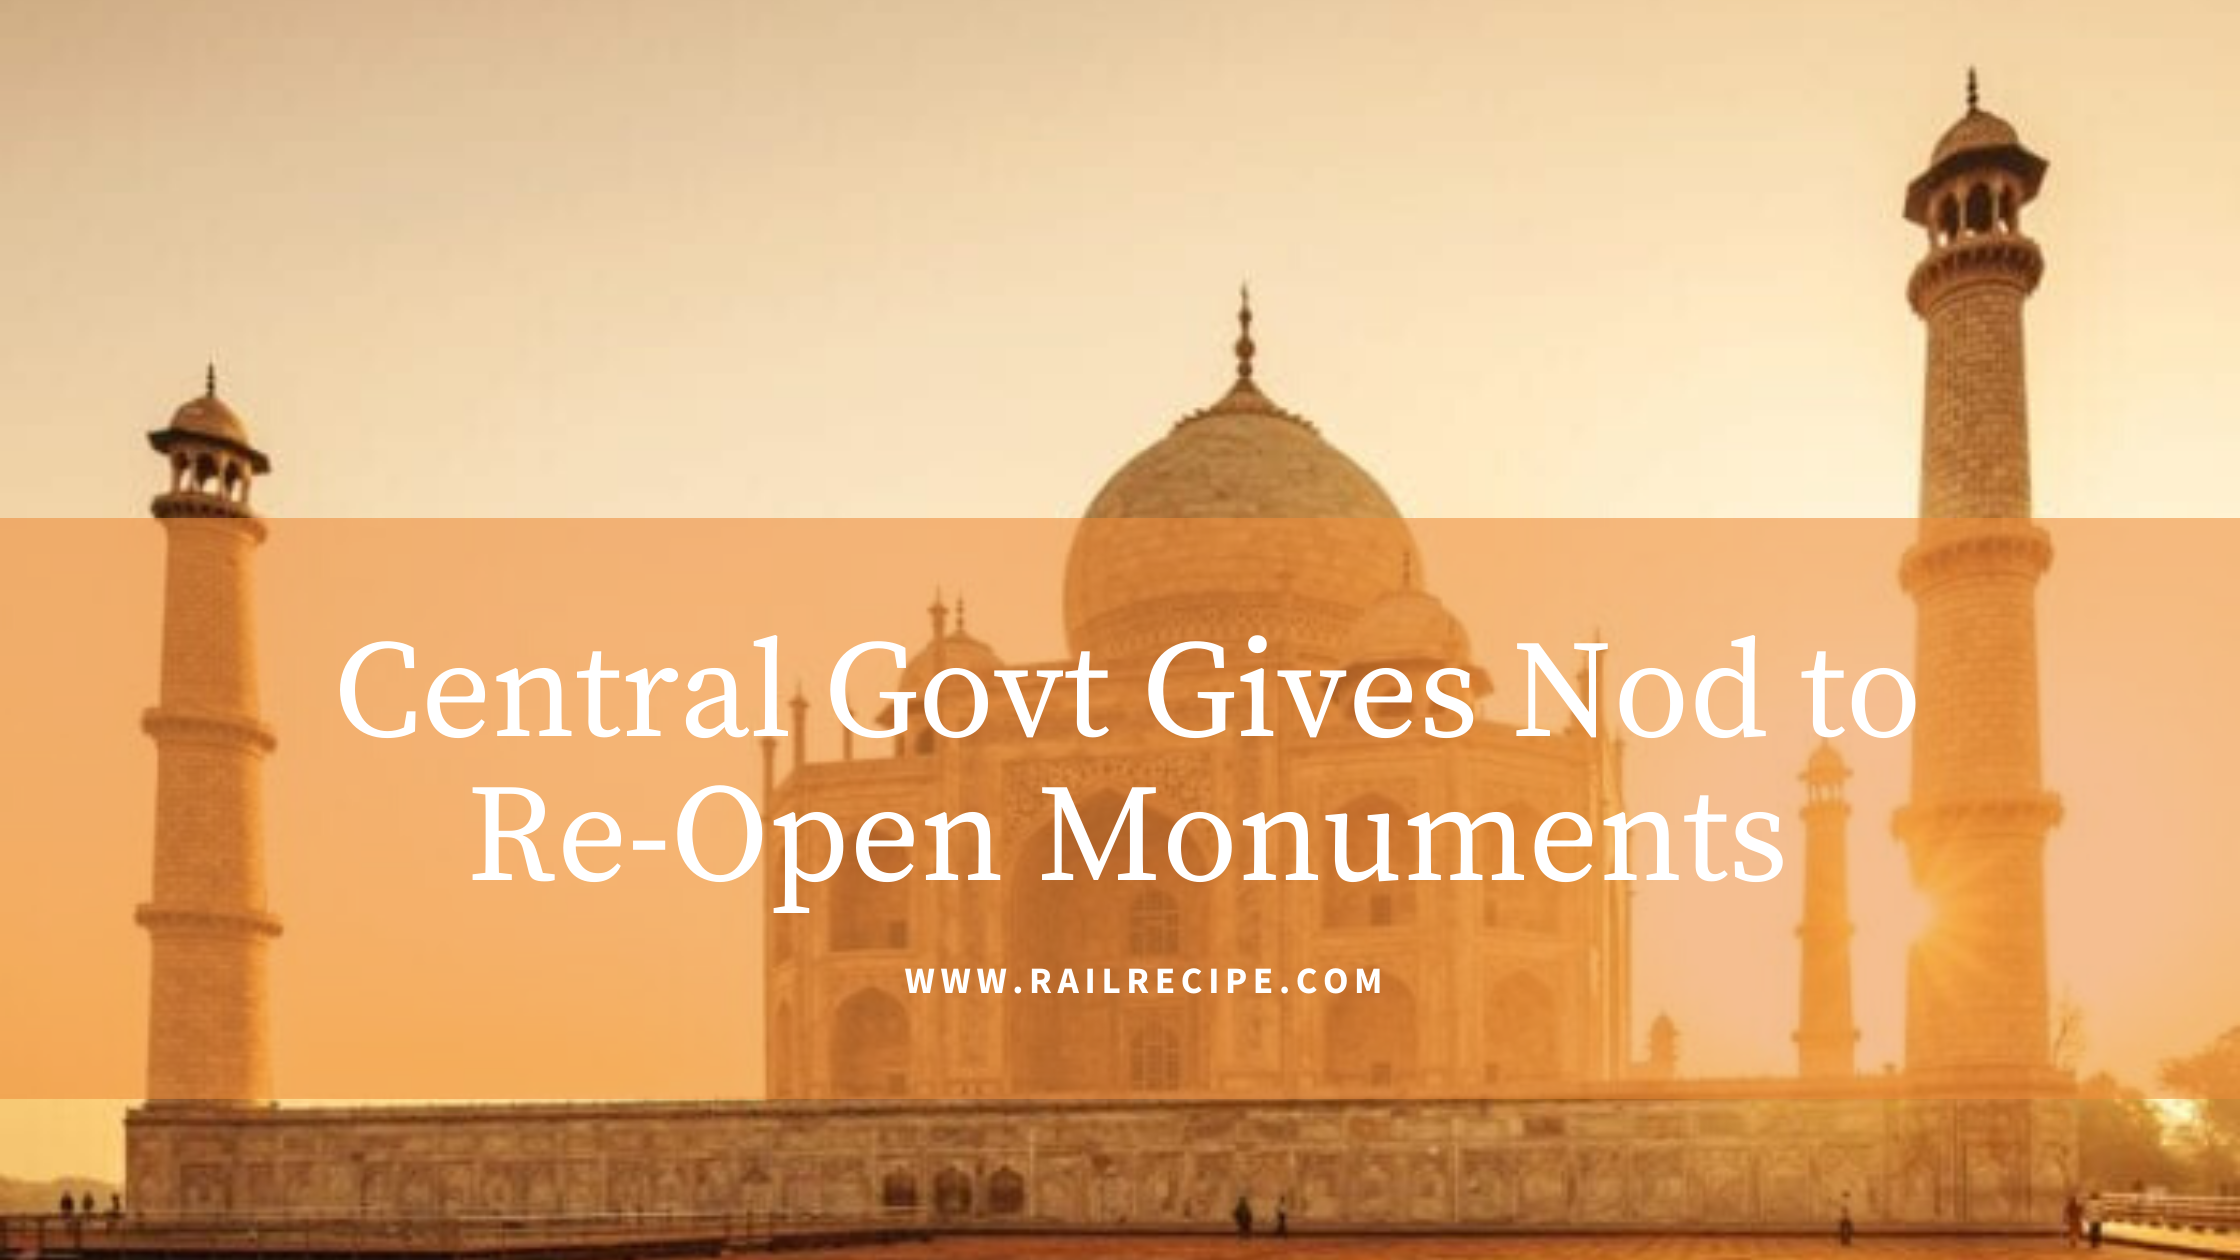 Central Govt Gives Nod to Re-Open Monuments From July 7